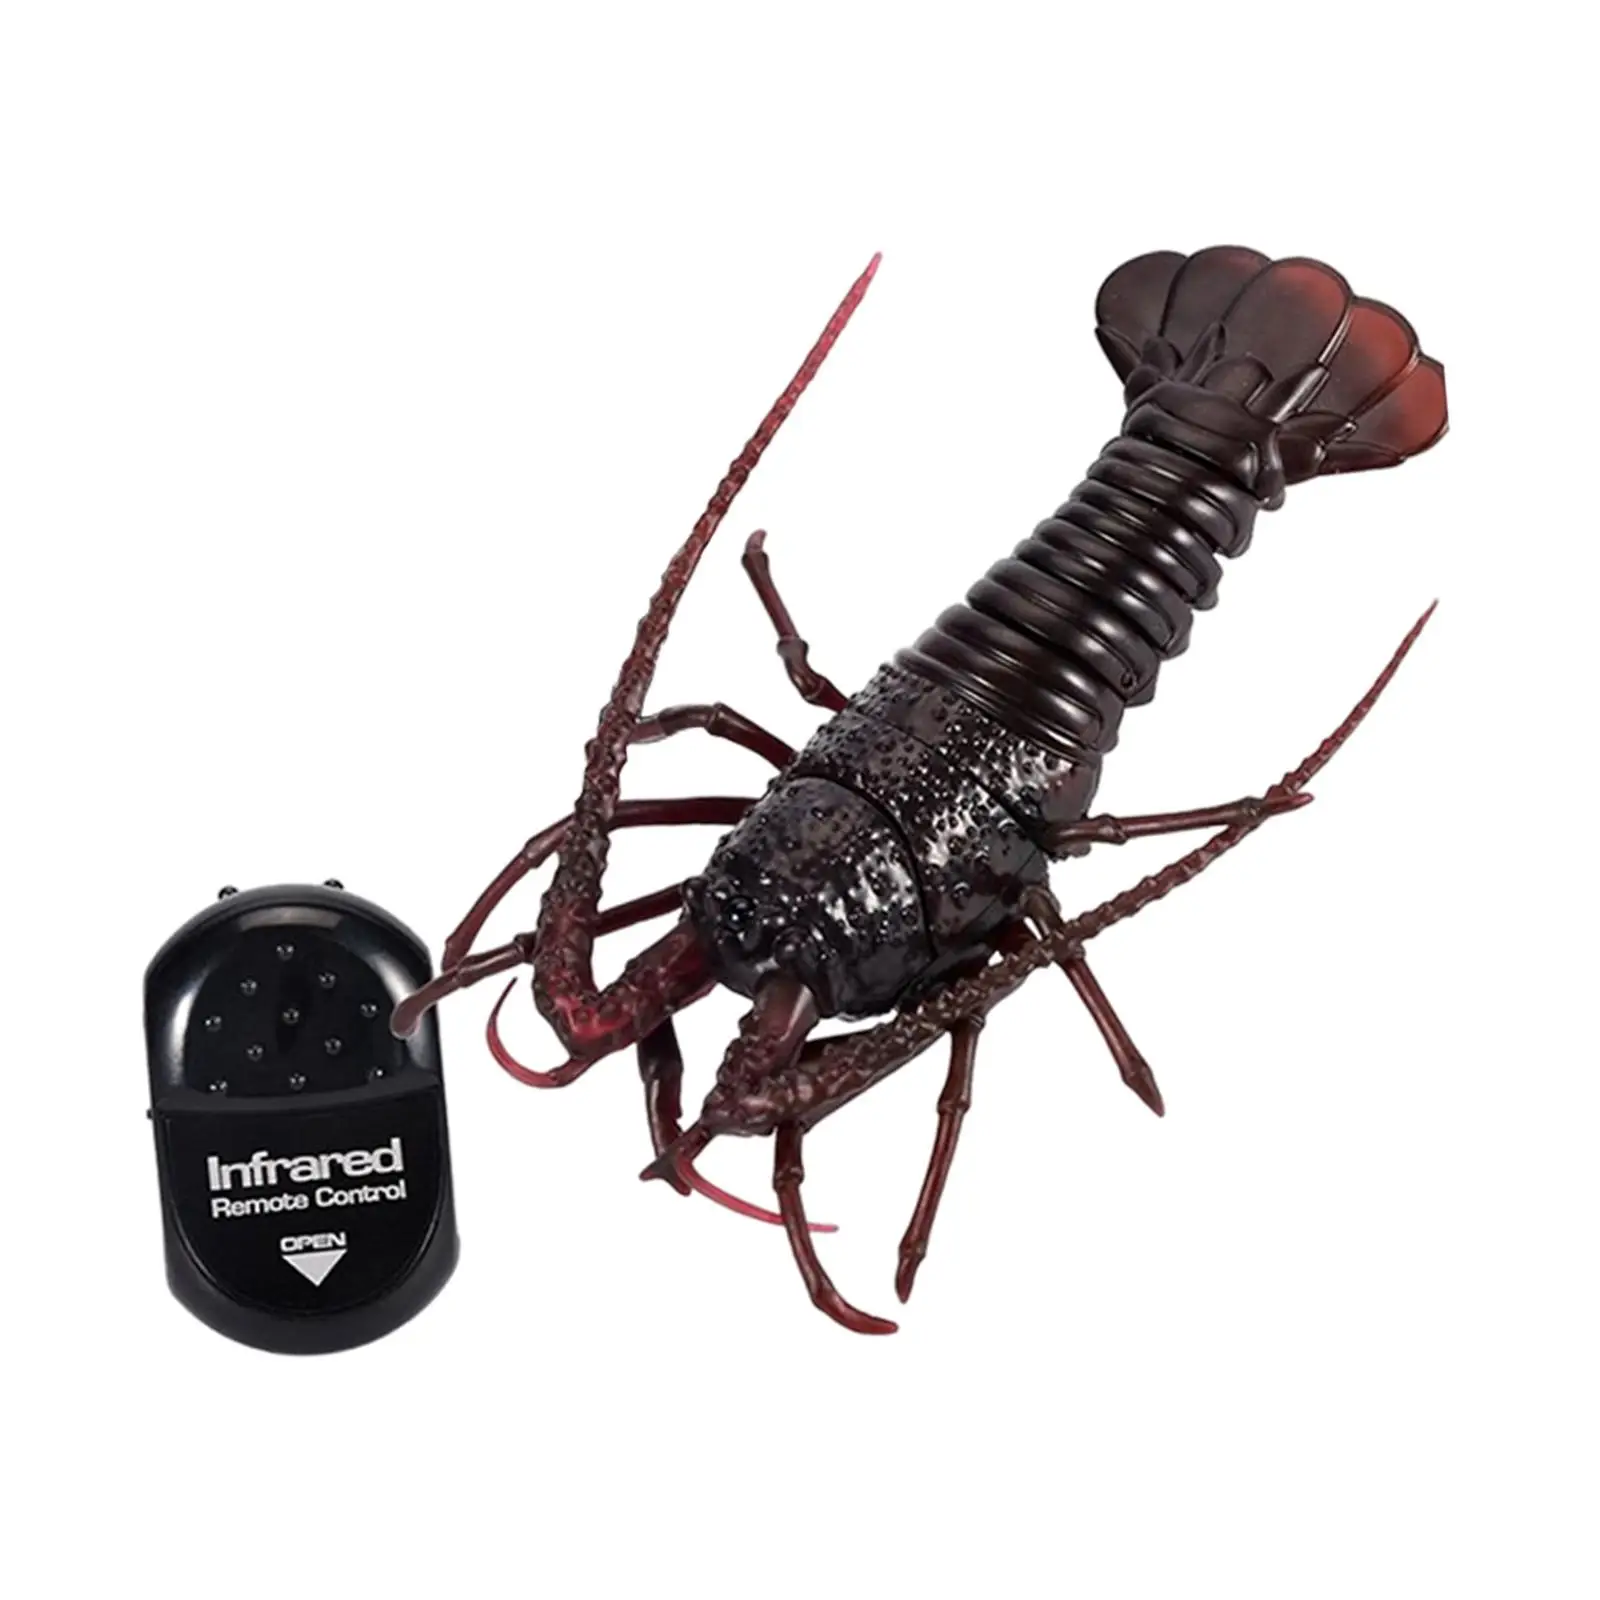 Remote Control Crawfish Toy Vehicle Car Pet Model Electric Infrared RC Shrimp for Girls Boys Kids Children Birthday Gifts